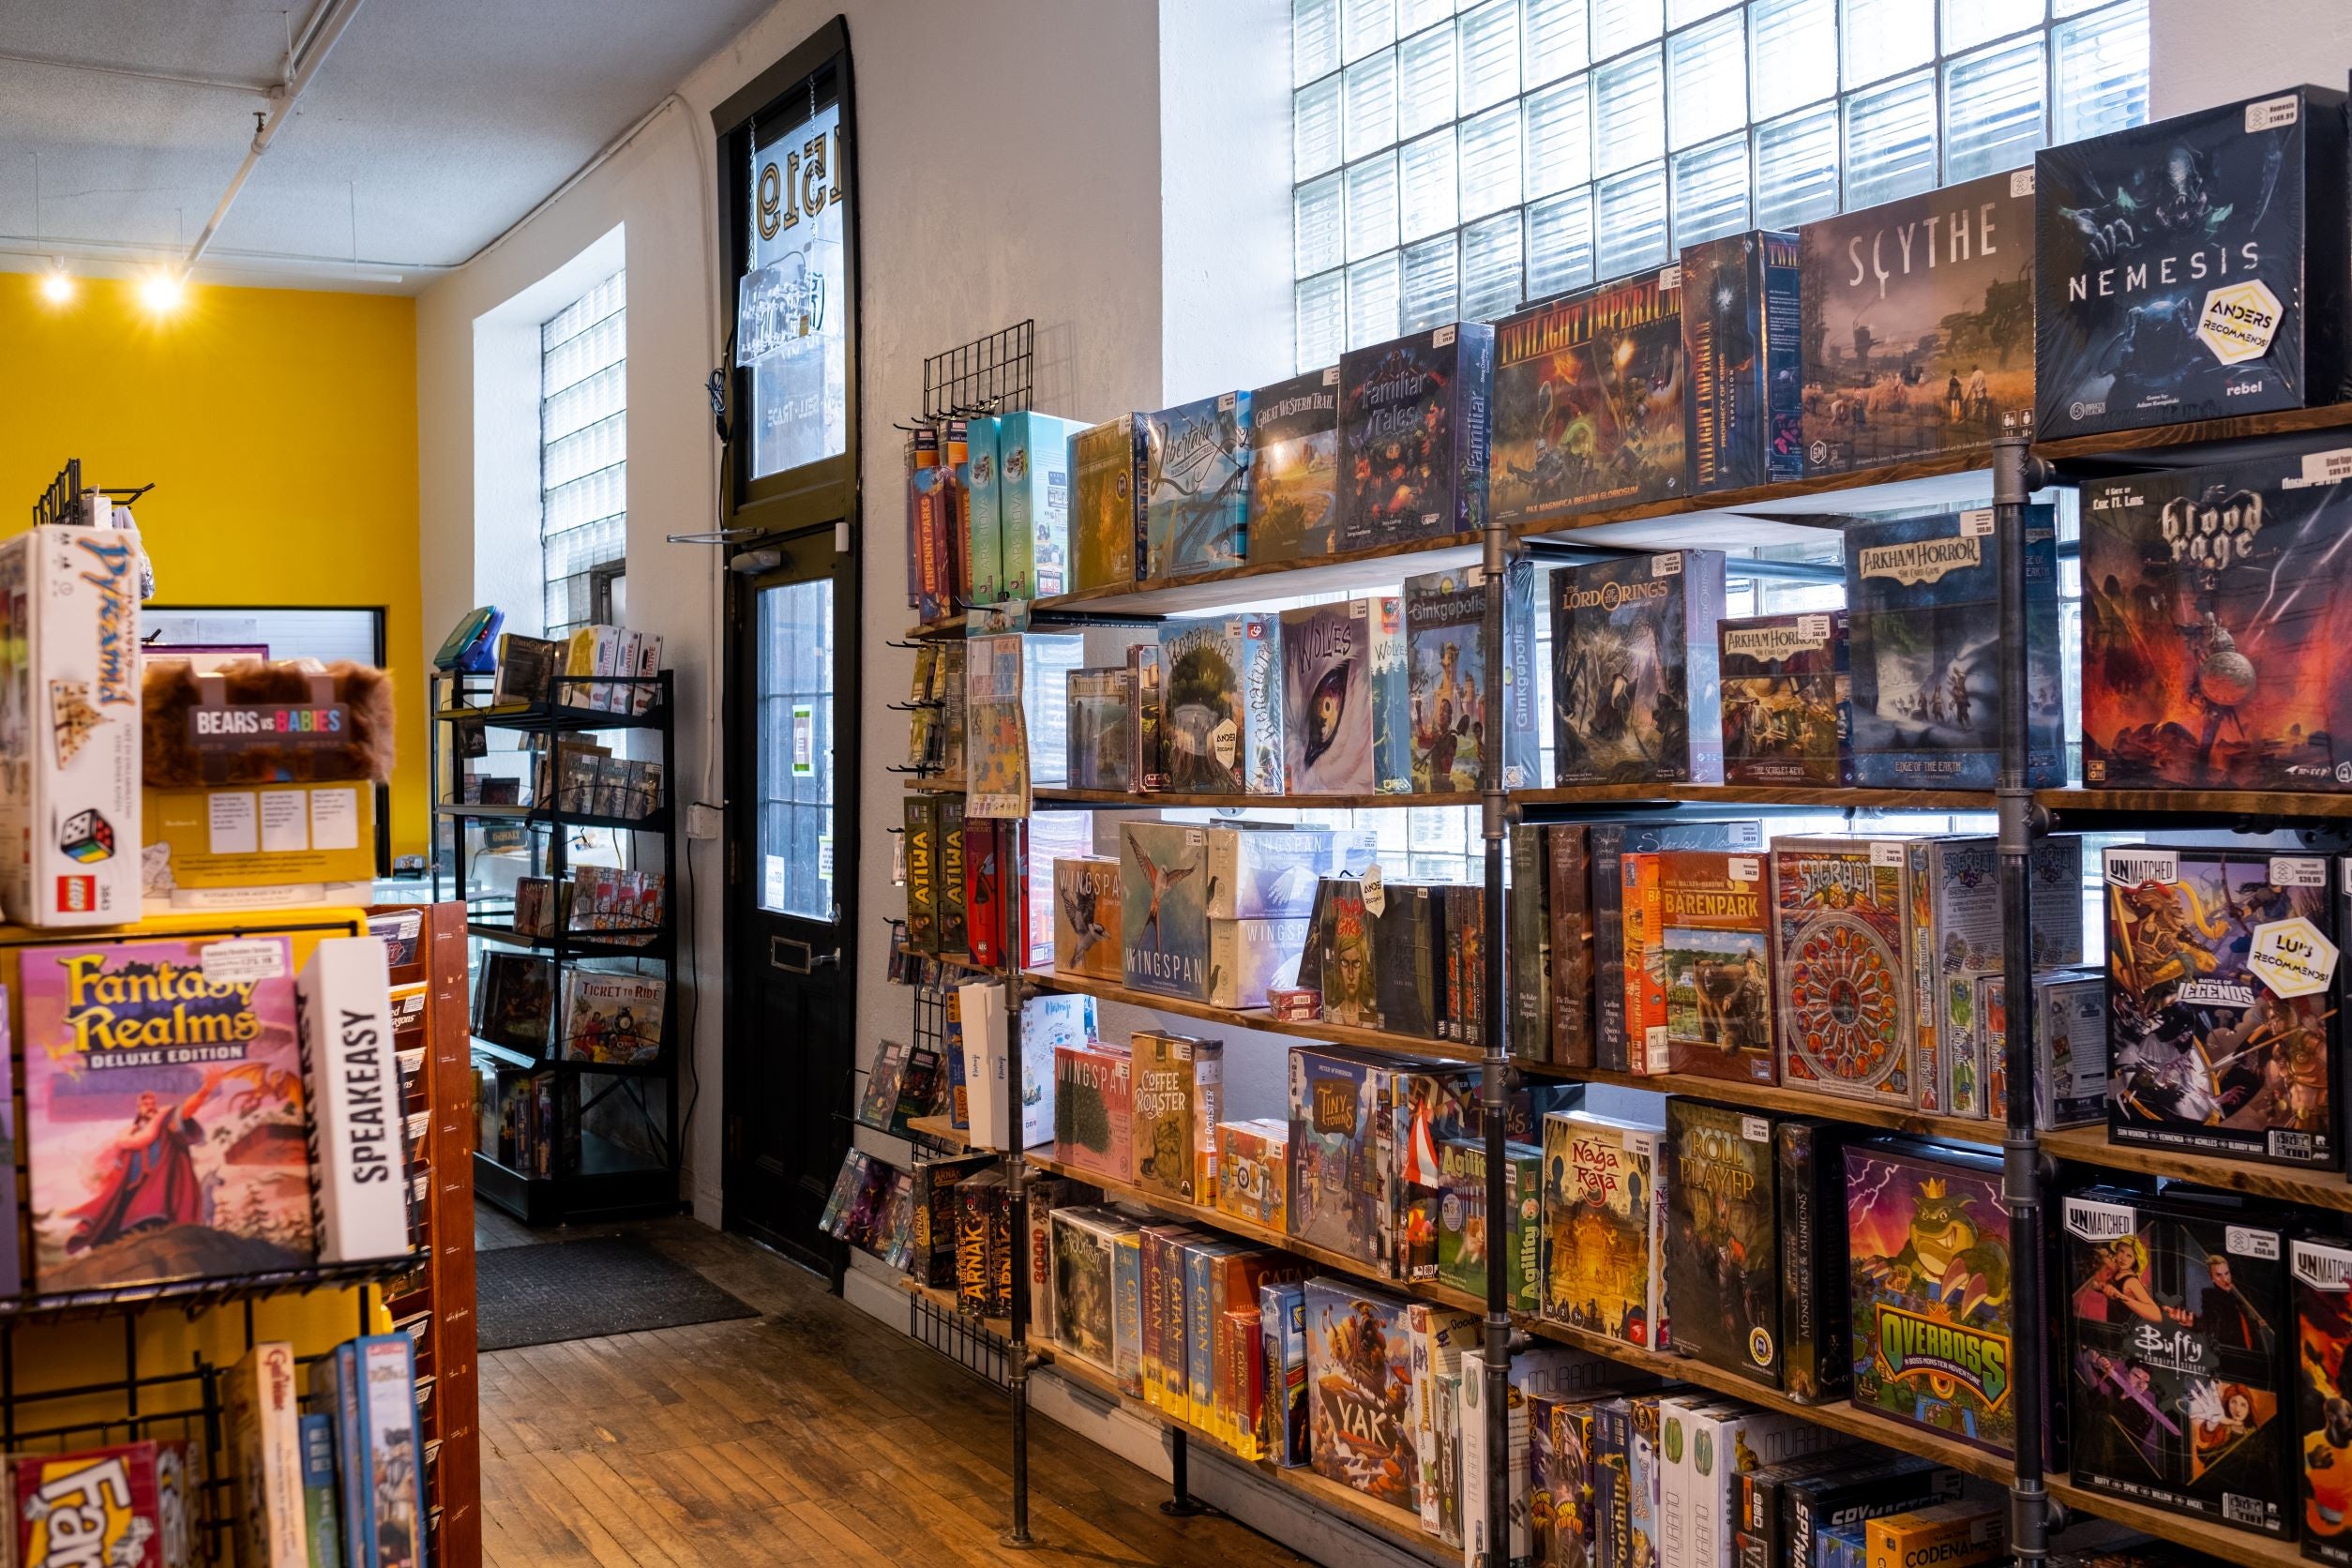 Image shows the interior of All Systems Go's storefront in northeast Minneapolis, featuring several shelves of new board games.